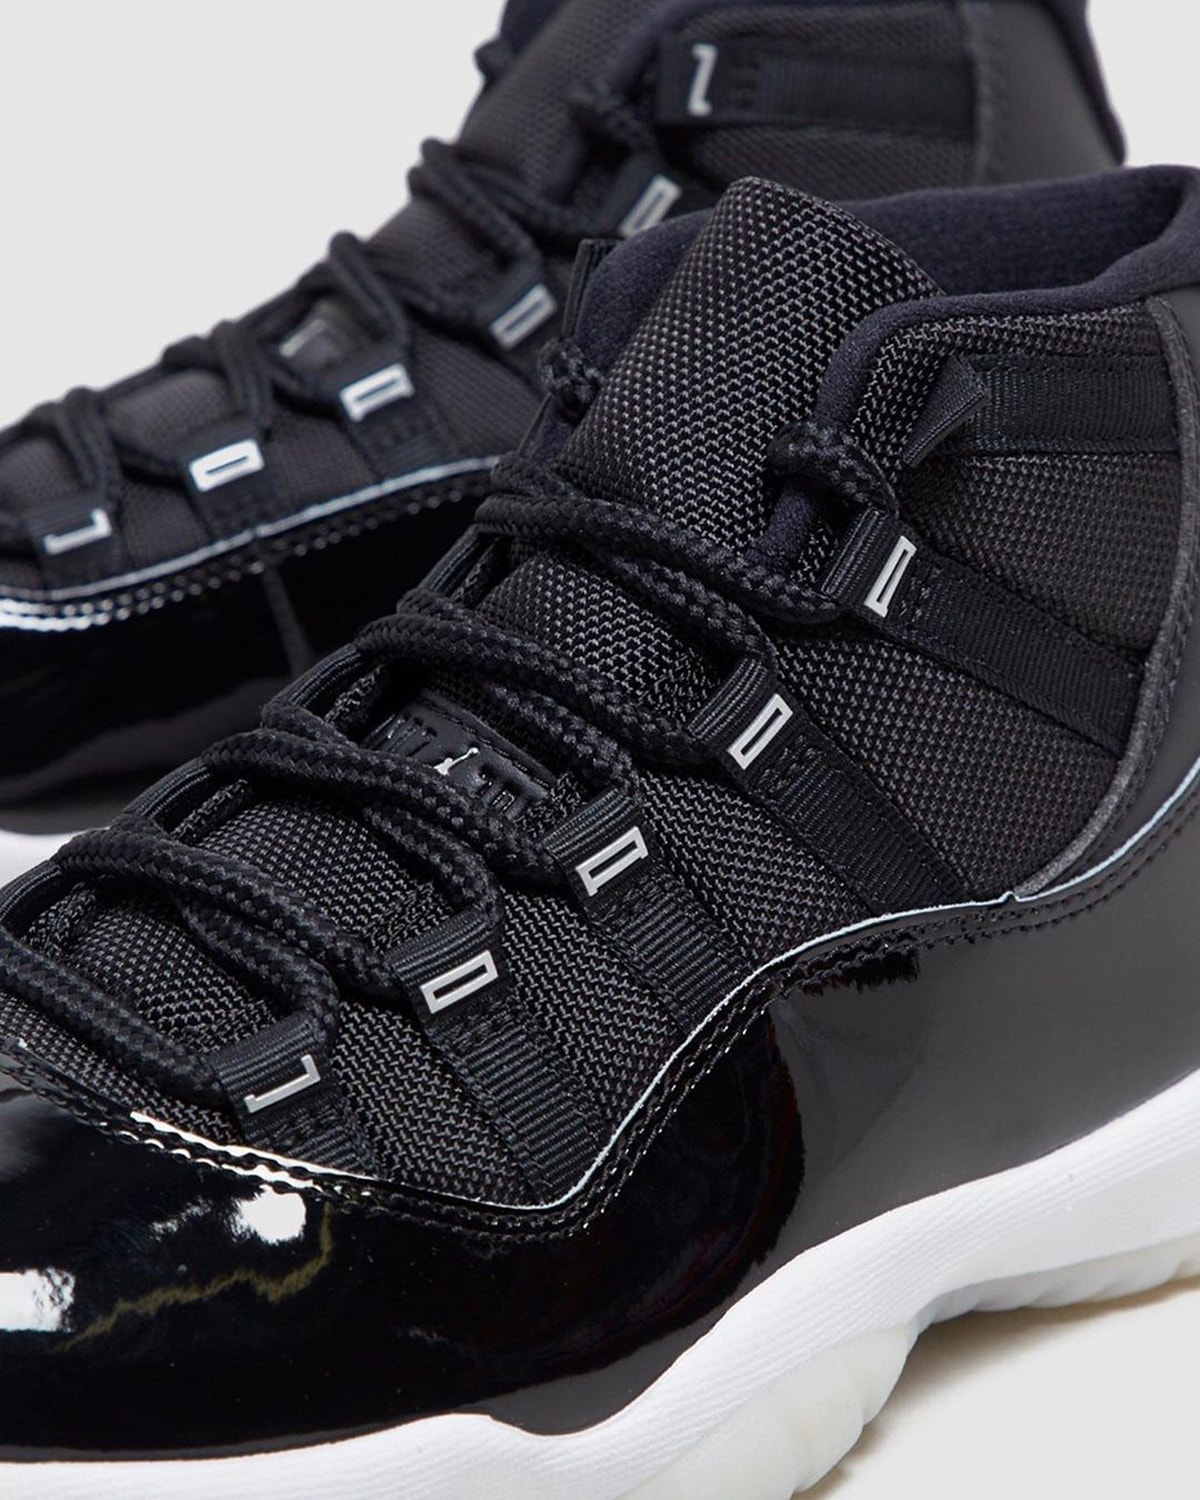 25th-anniversary-air-jordan-11-black-clear-holiday-2020-ct8012-011-release-date-4